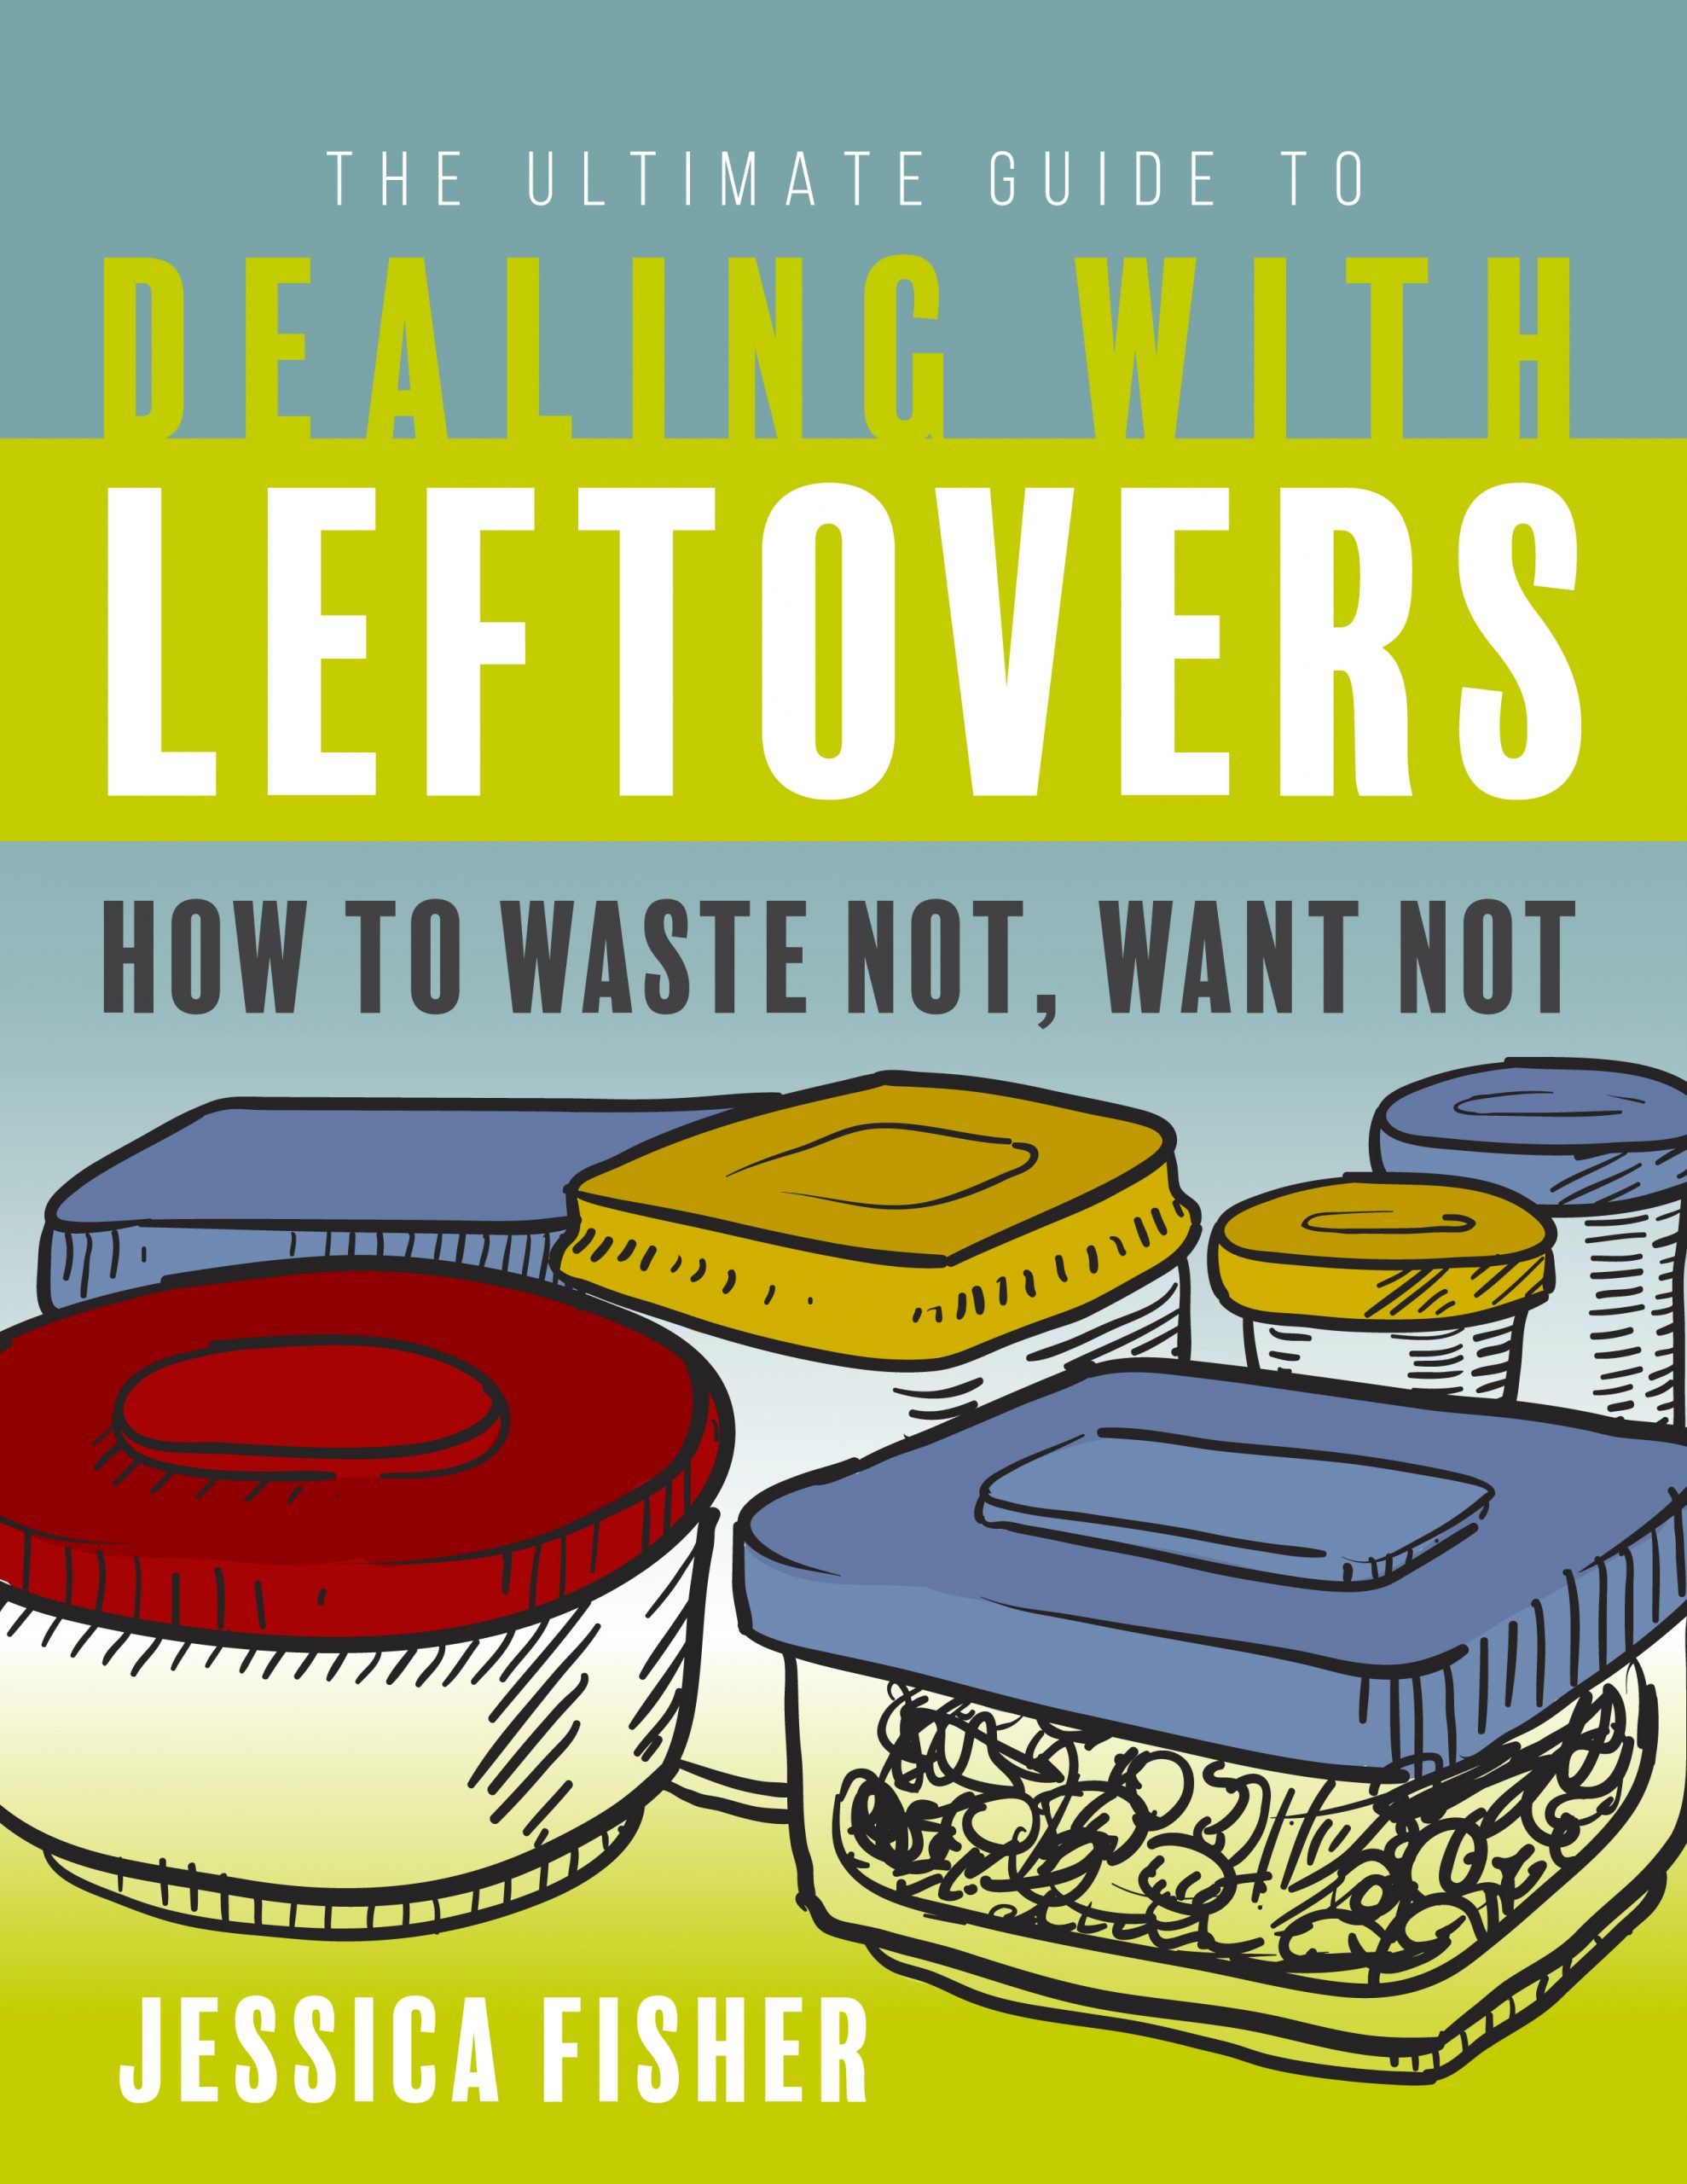 cover image for Ultimate Guide to Dealing with Leftovers.